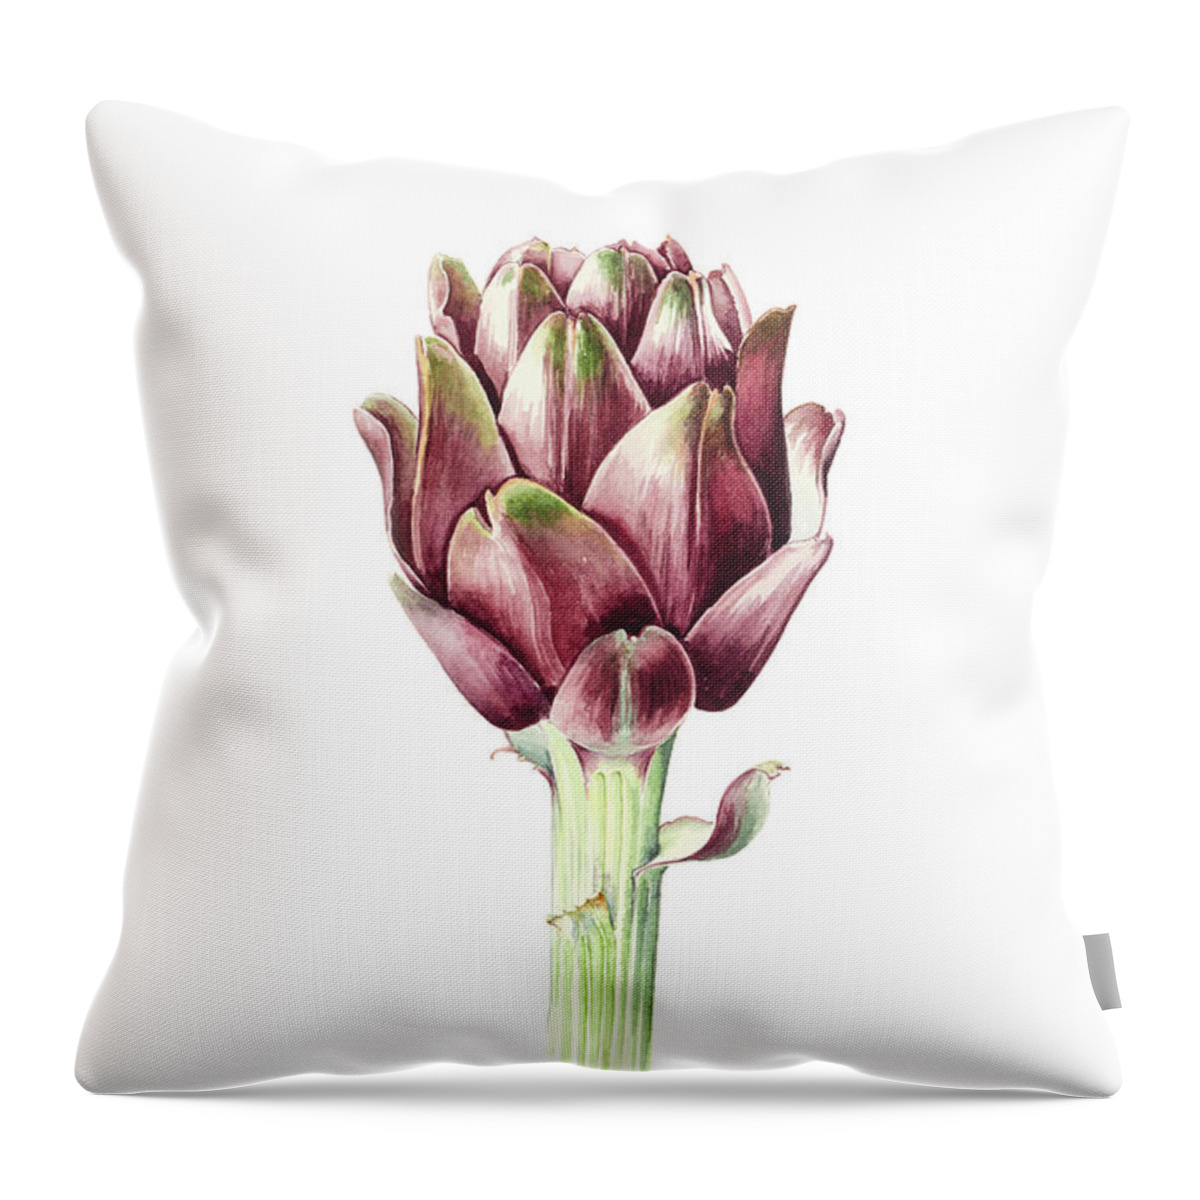 Artichoke Throw Pillow featuring the painting Sardinian Artichoke by Alison Cooper